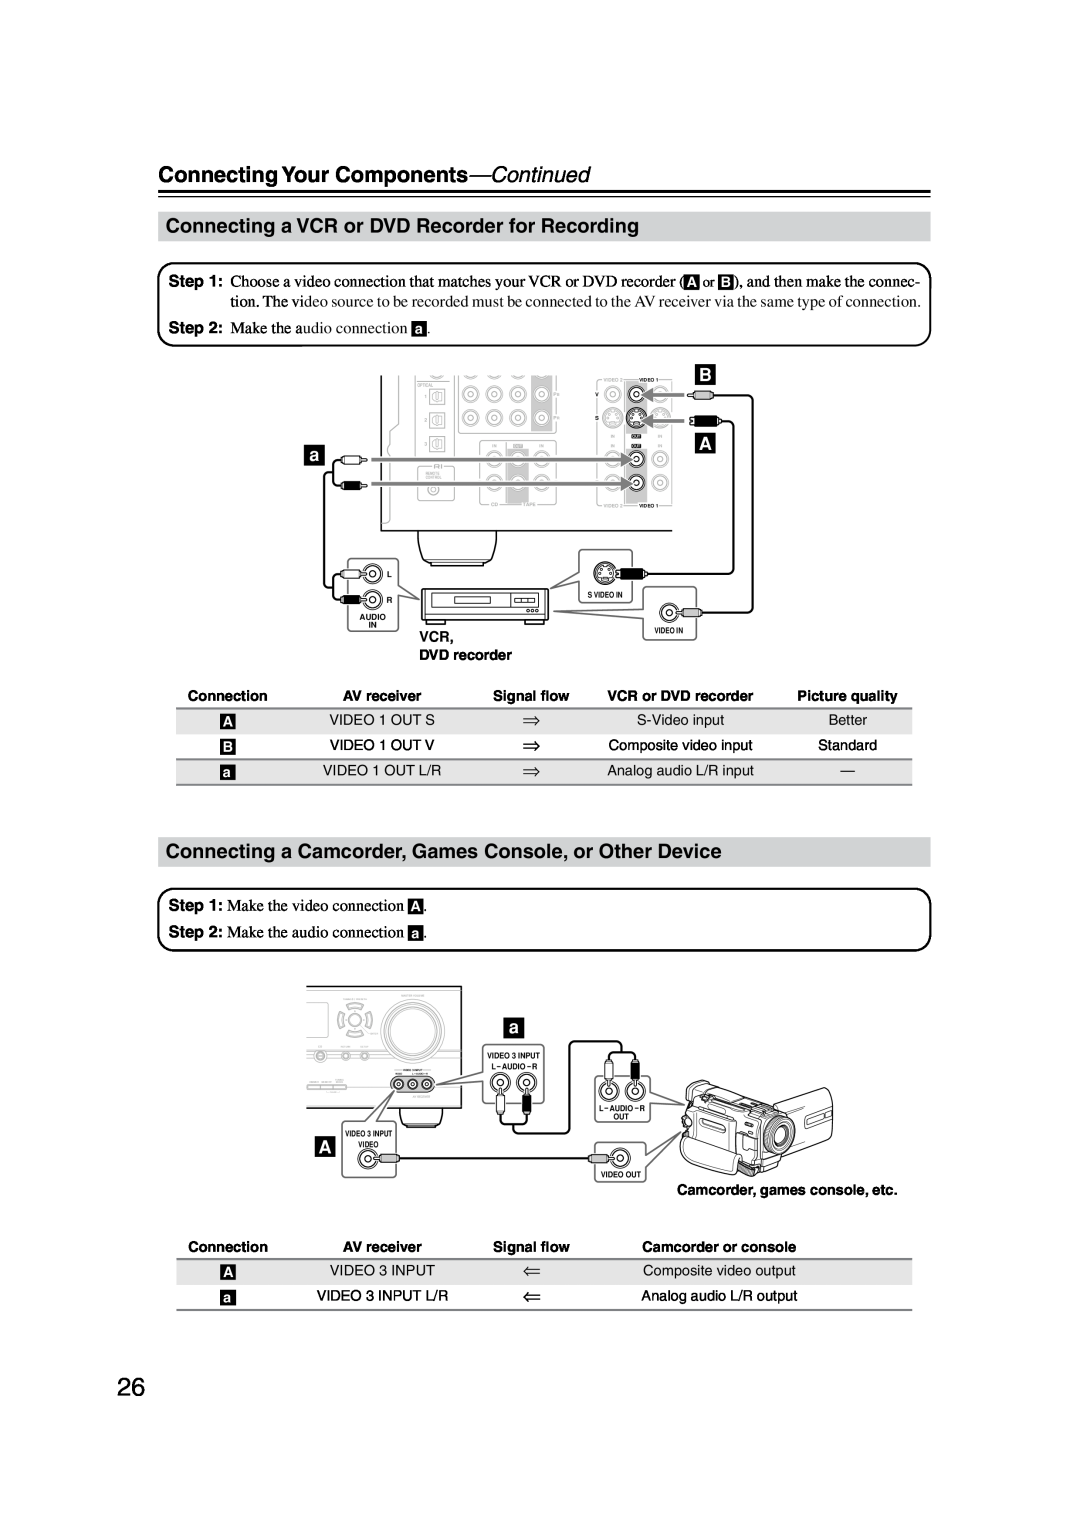 Onkyo TX-SR574 instruction manual Connecting a VCR or DVD Recorder for Recording, Connecting Your Components-Continued 